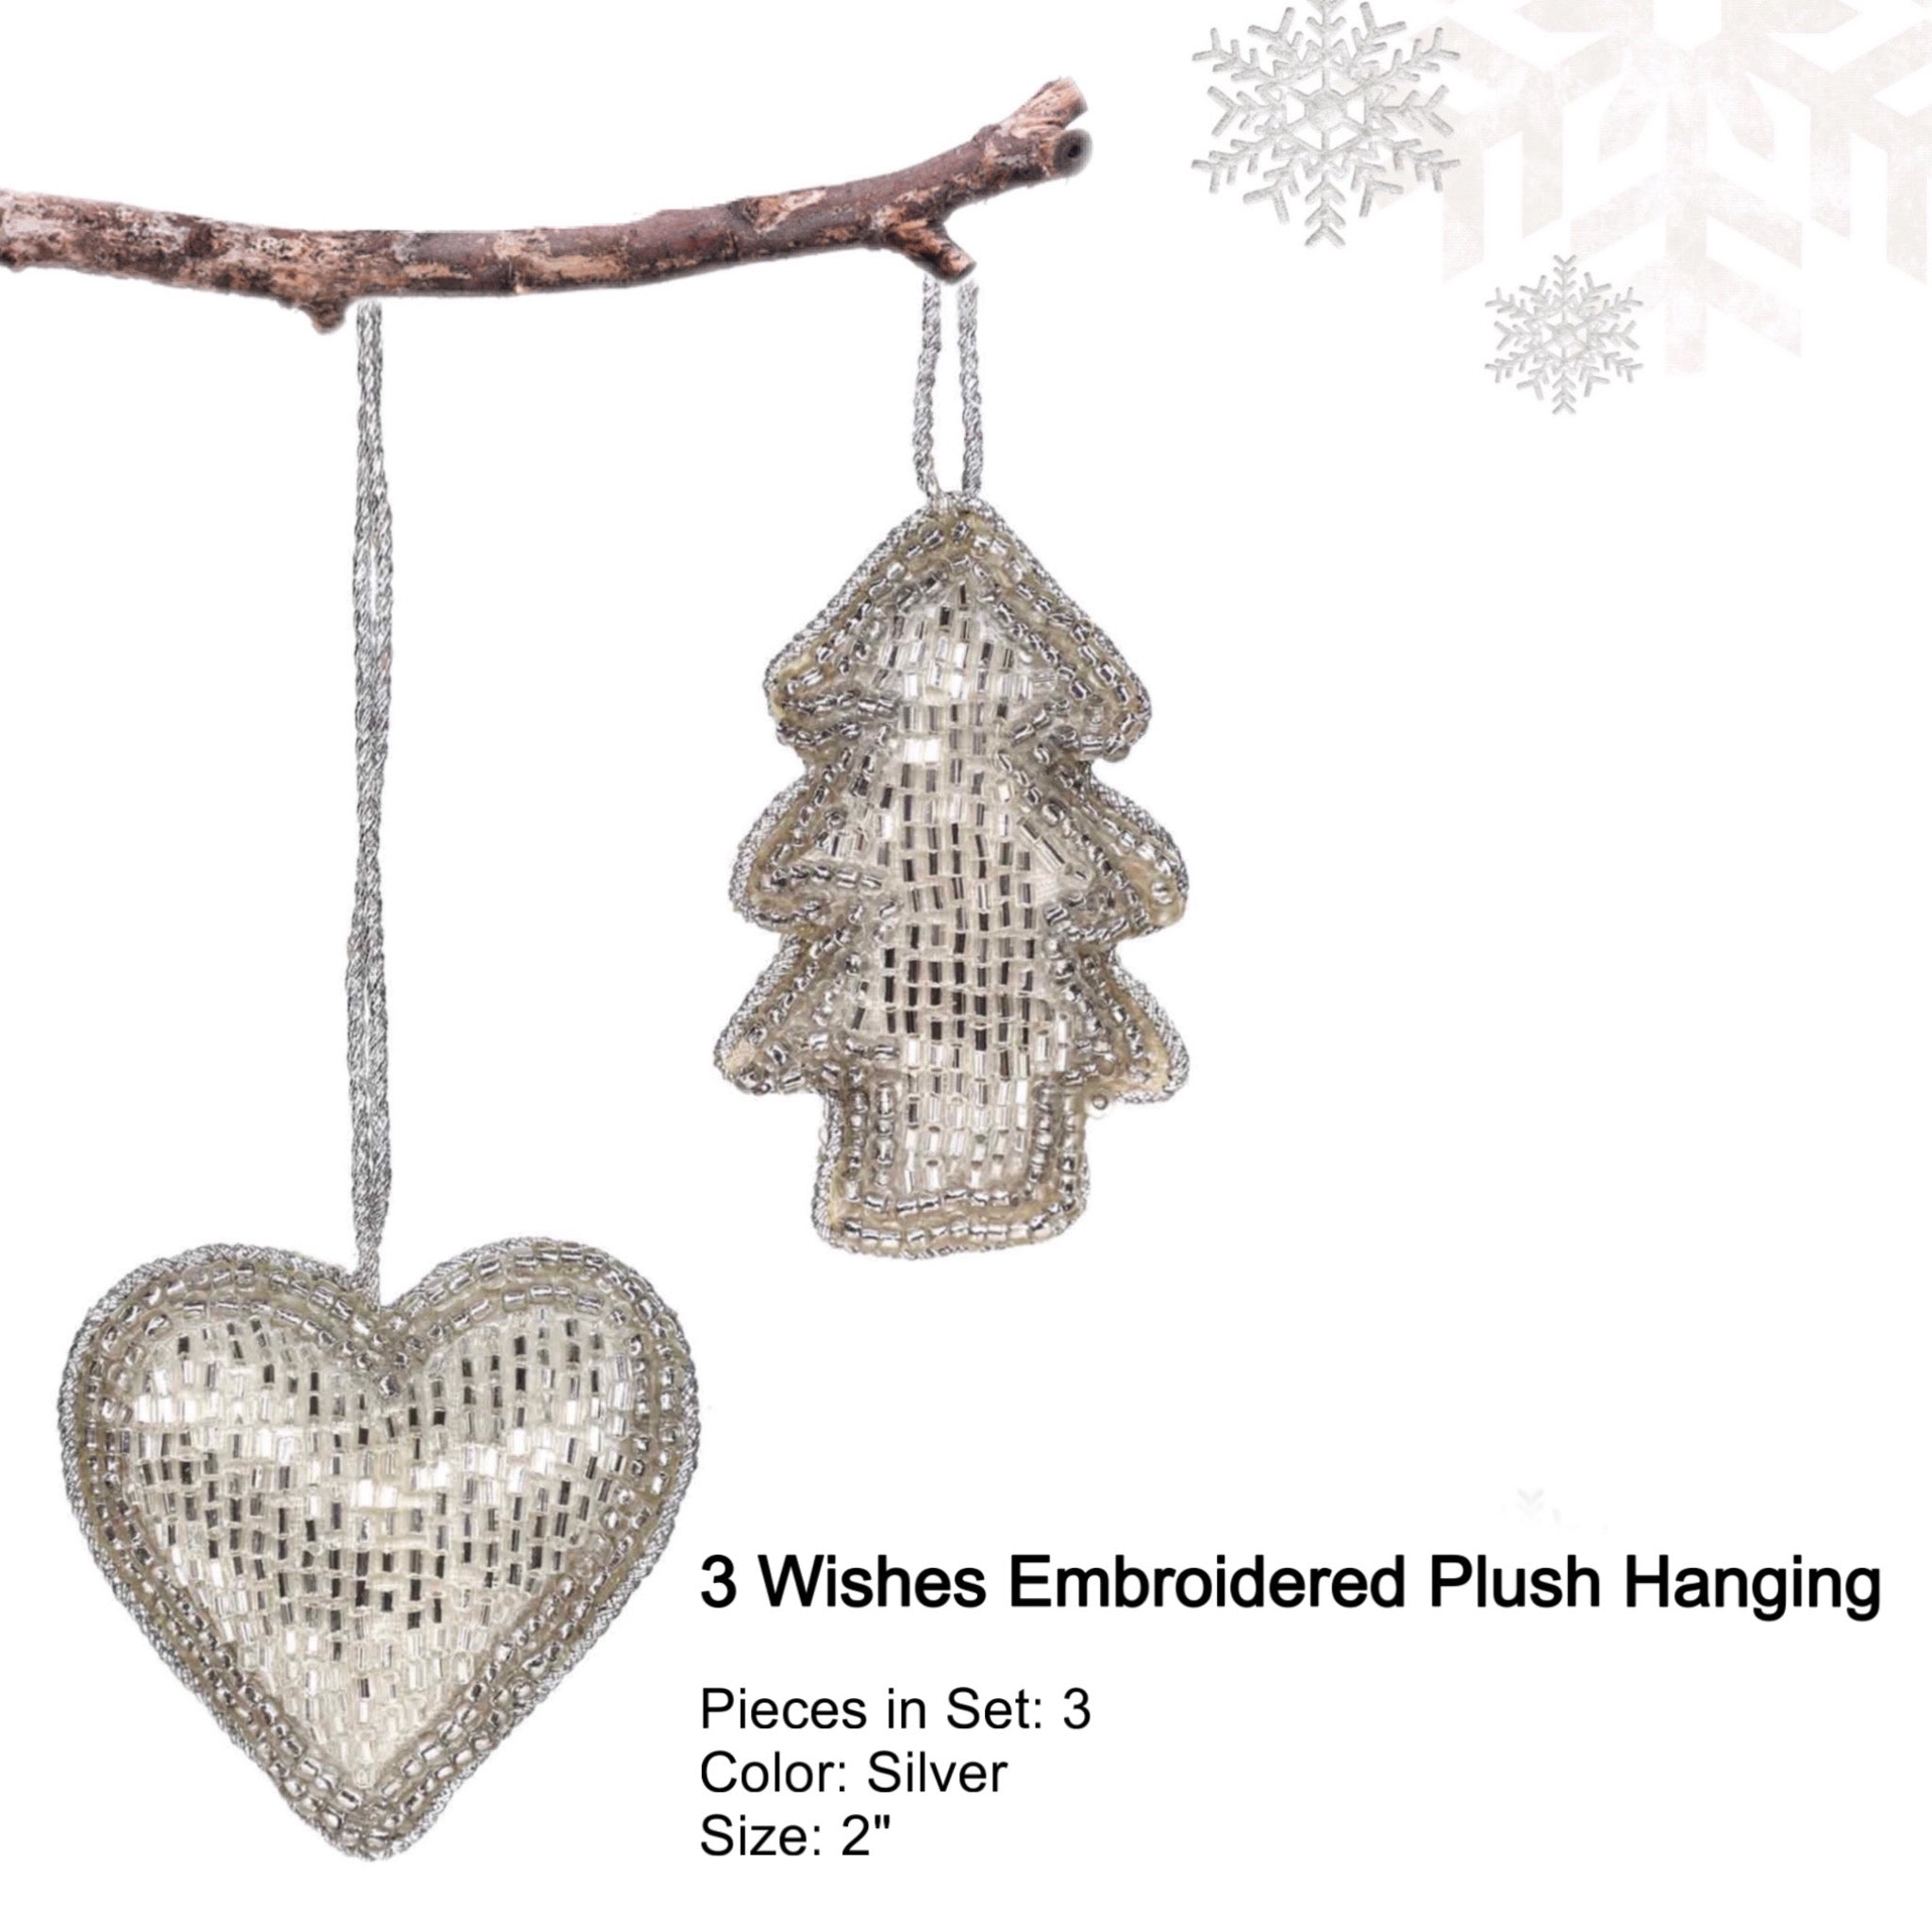 3 Wishes Embroidered Plush Hanging in Silver, Set of 3